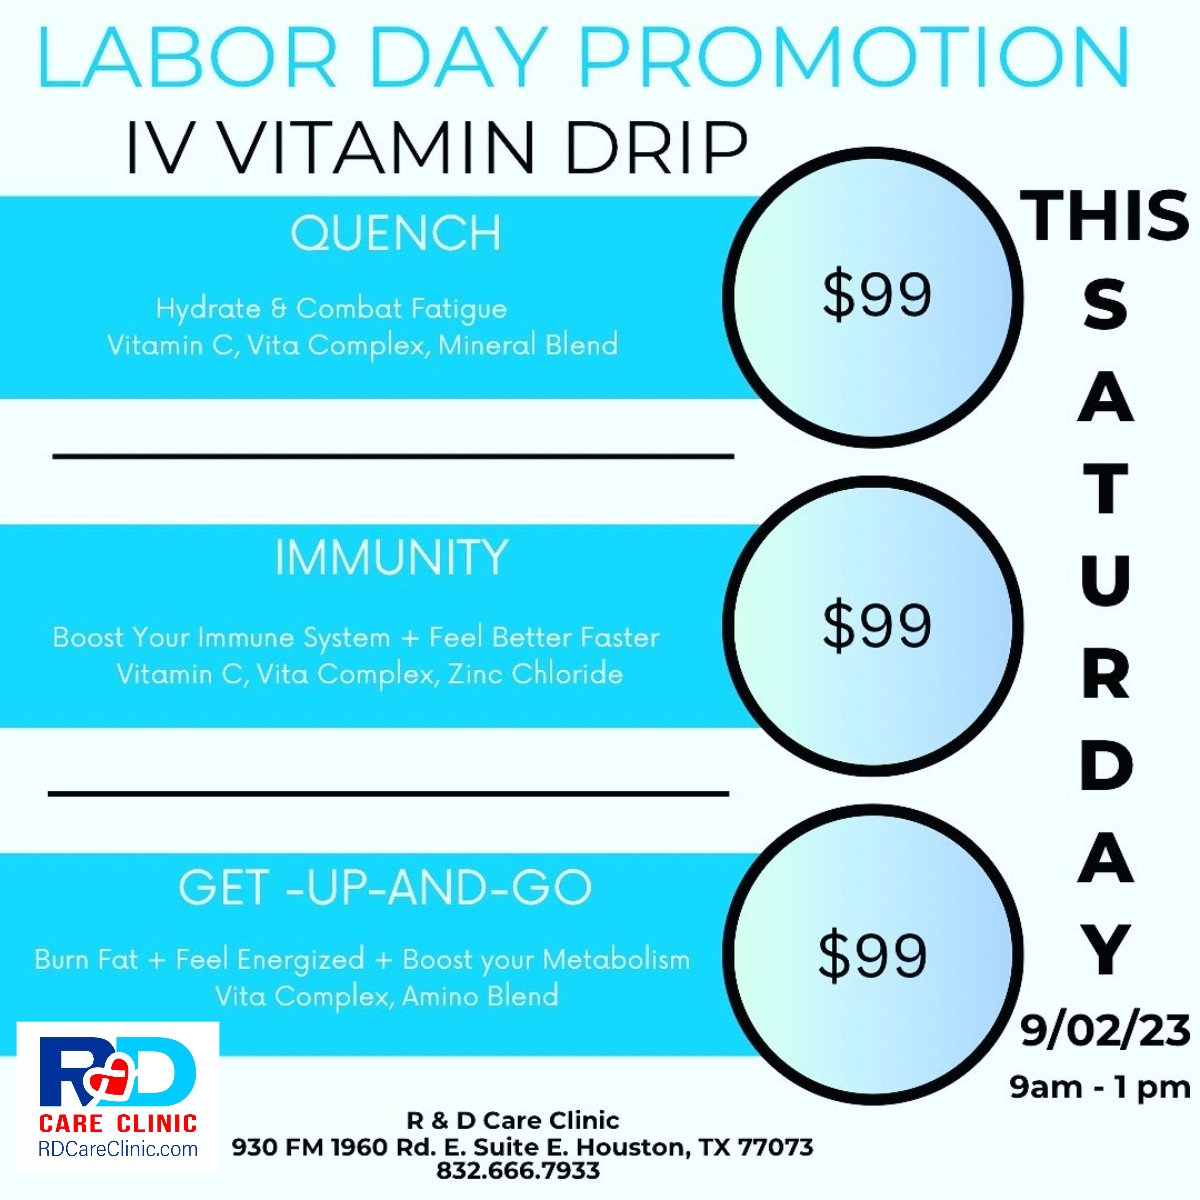 Labor Day Sale!

Your Wellness Center in Houston, TX... tinyurl.com/27dl6dou

#health #medical #healthcare #medicine #treatment #wellness #weightloss #semaglutide #lipomino #lipo